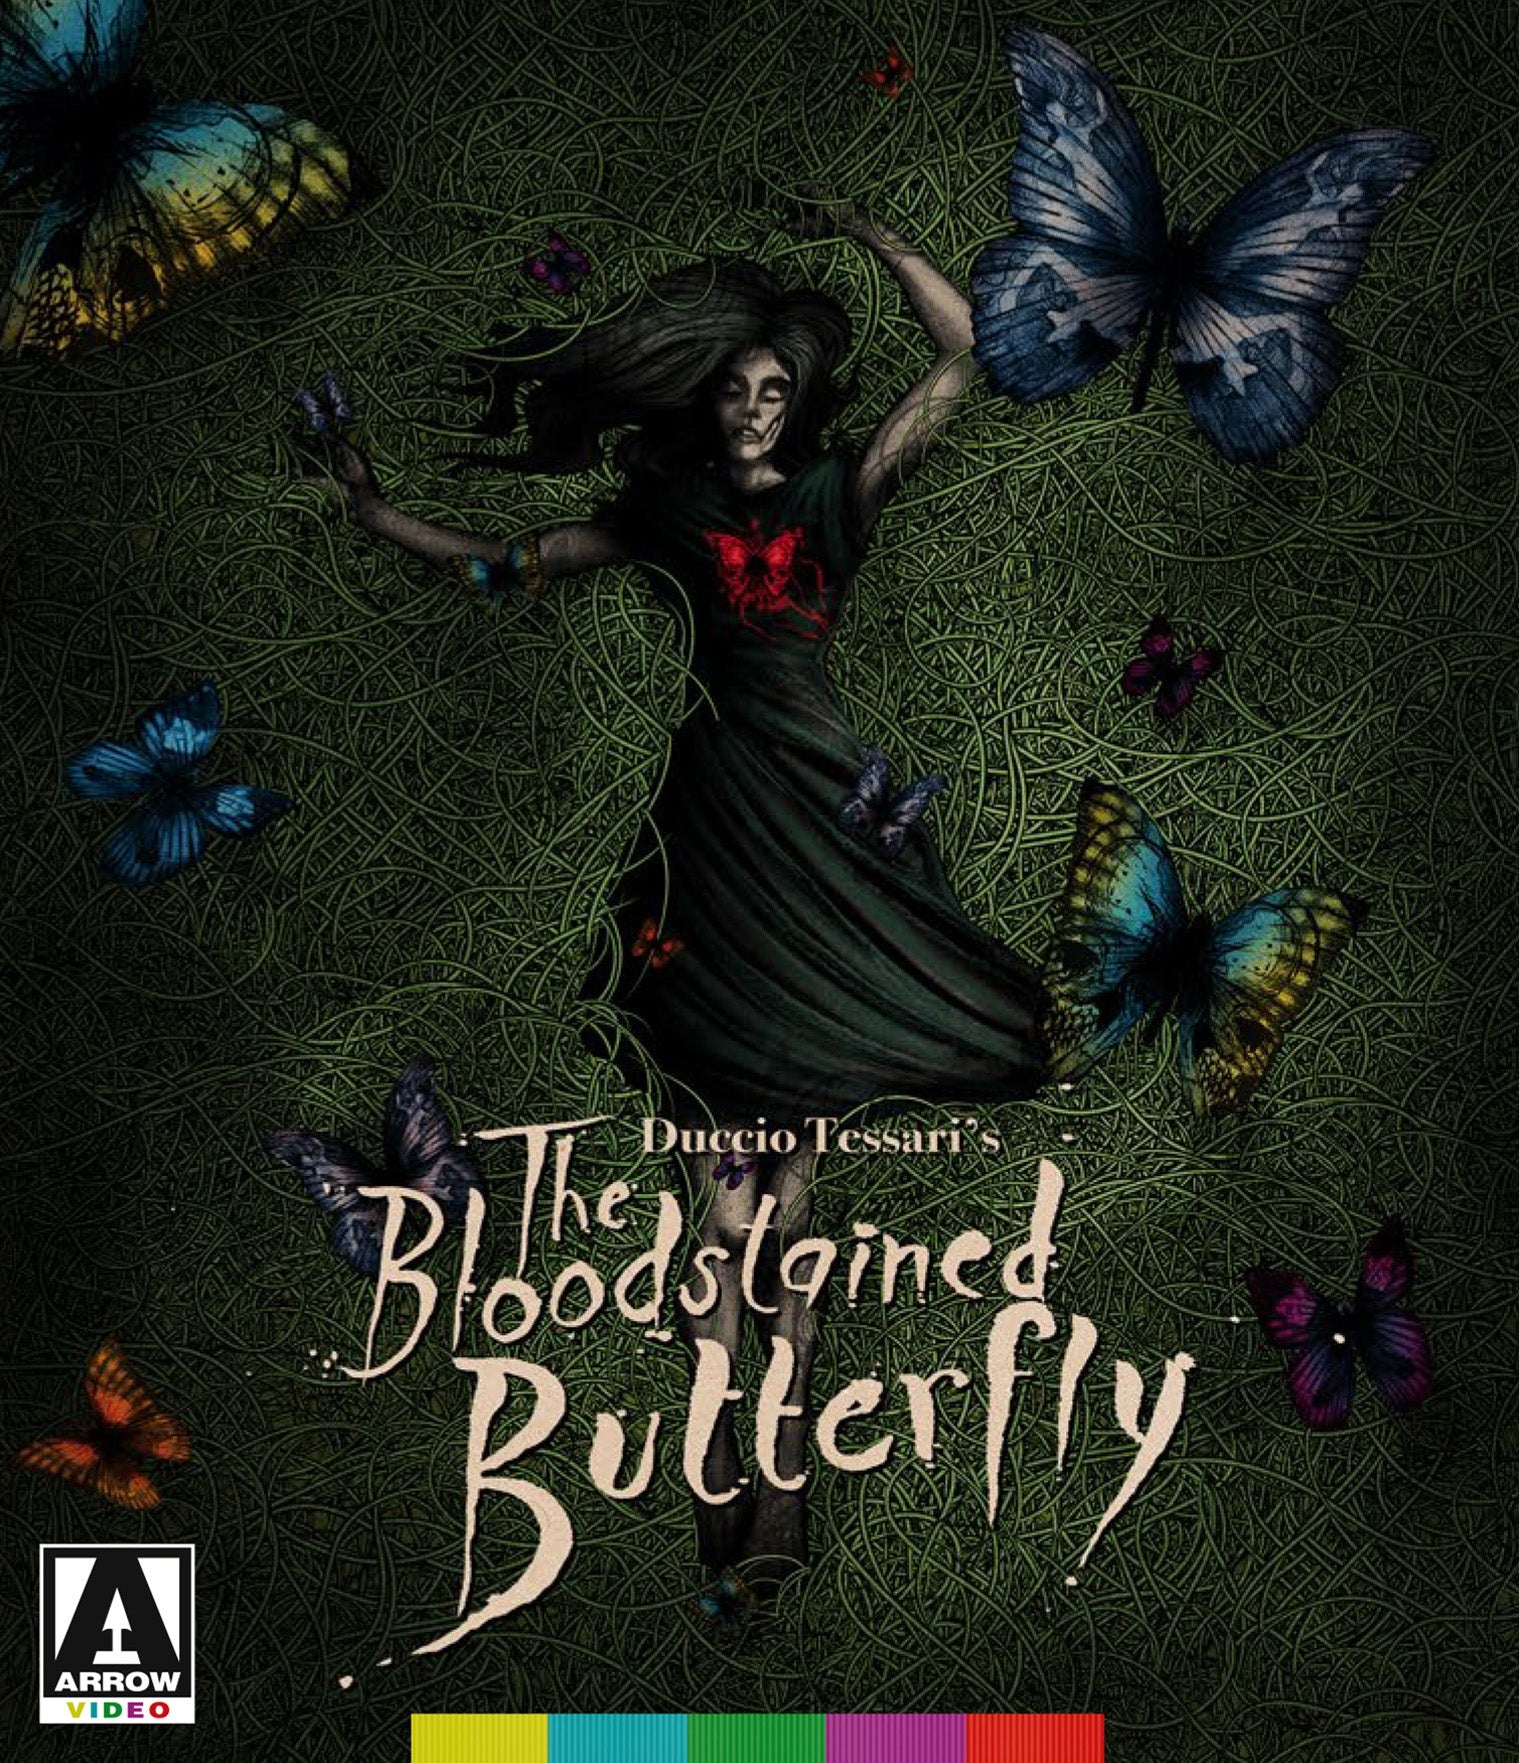 The Bloodstained Butterfly Blu-Ray/dvd Blu-Ray